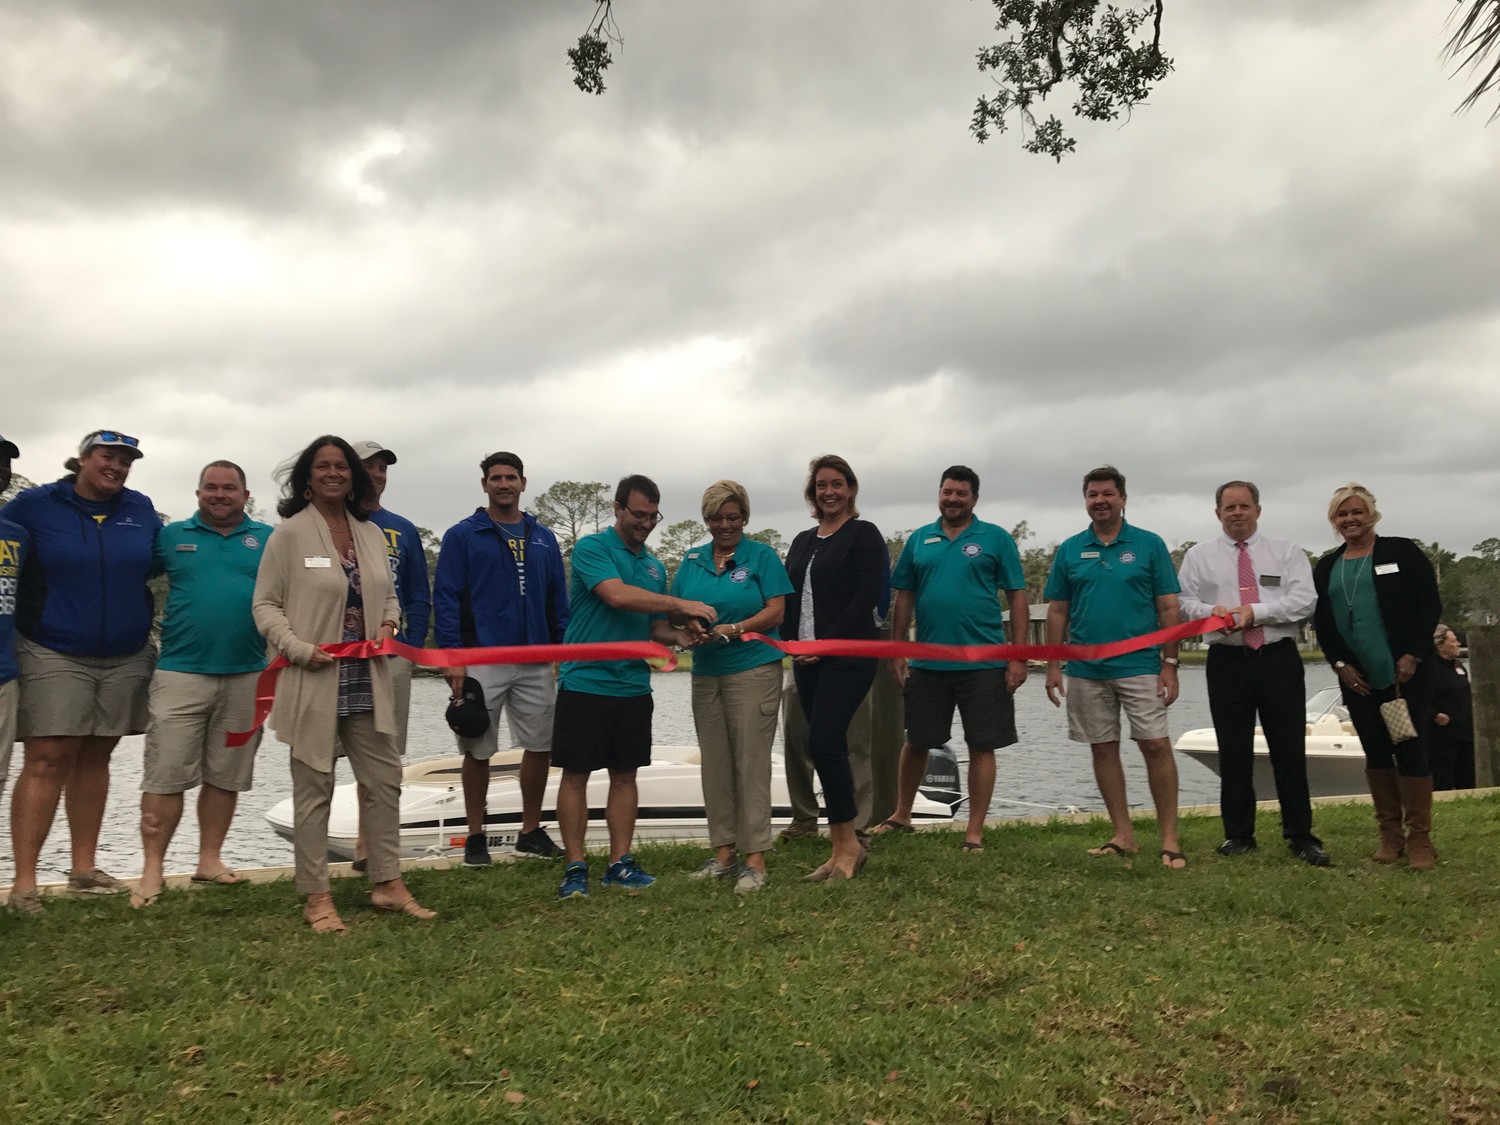 Representatives from Freedom Boat Club and the St. Johns County Chamber of Commerce Ponte Vedra Beach Division participate in ribbon cutting ceremony for the new Ponte Vedra business in mid-October.